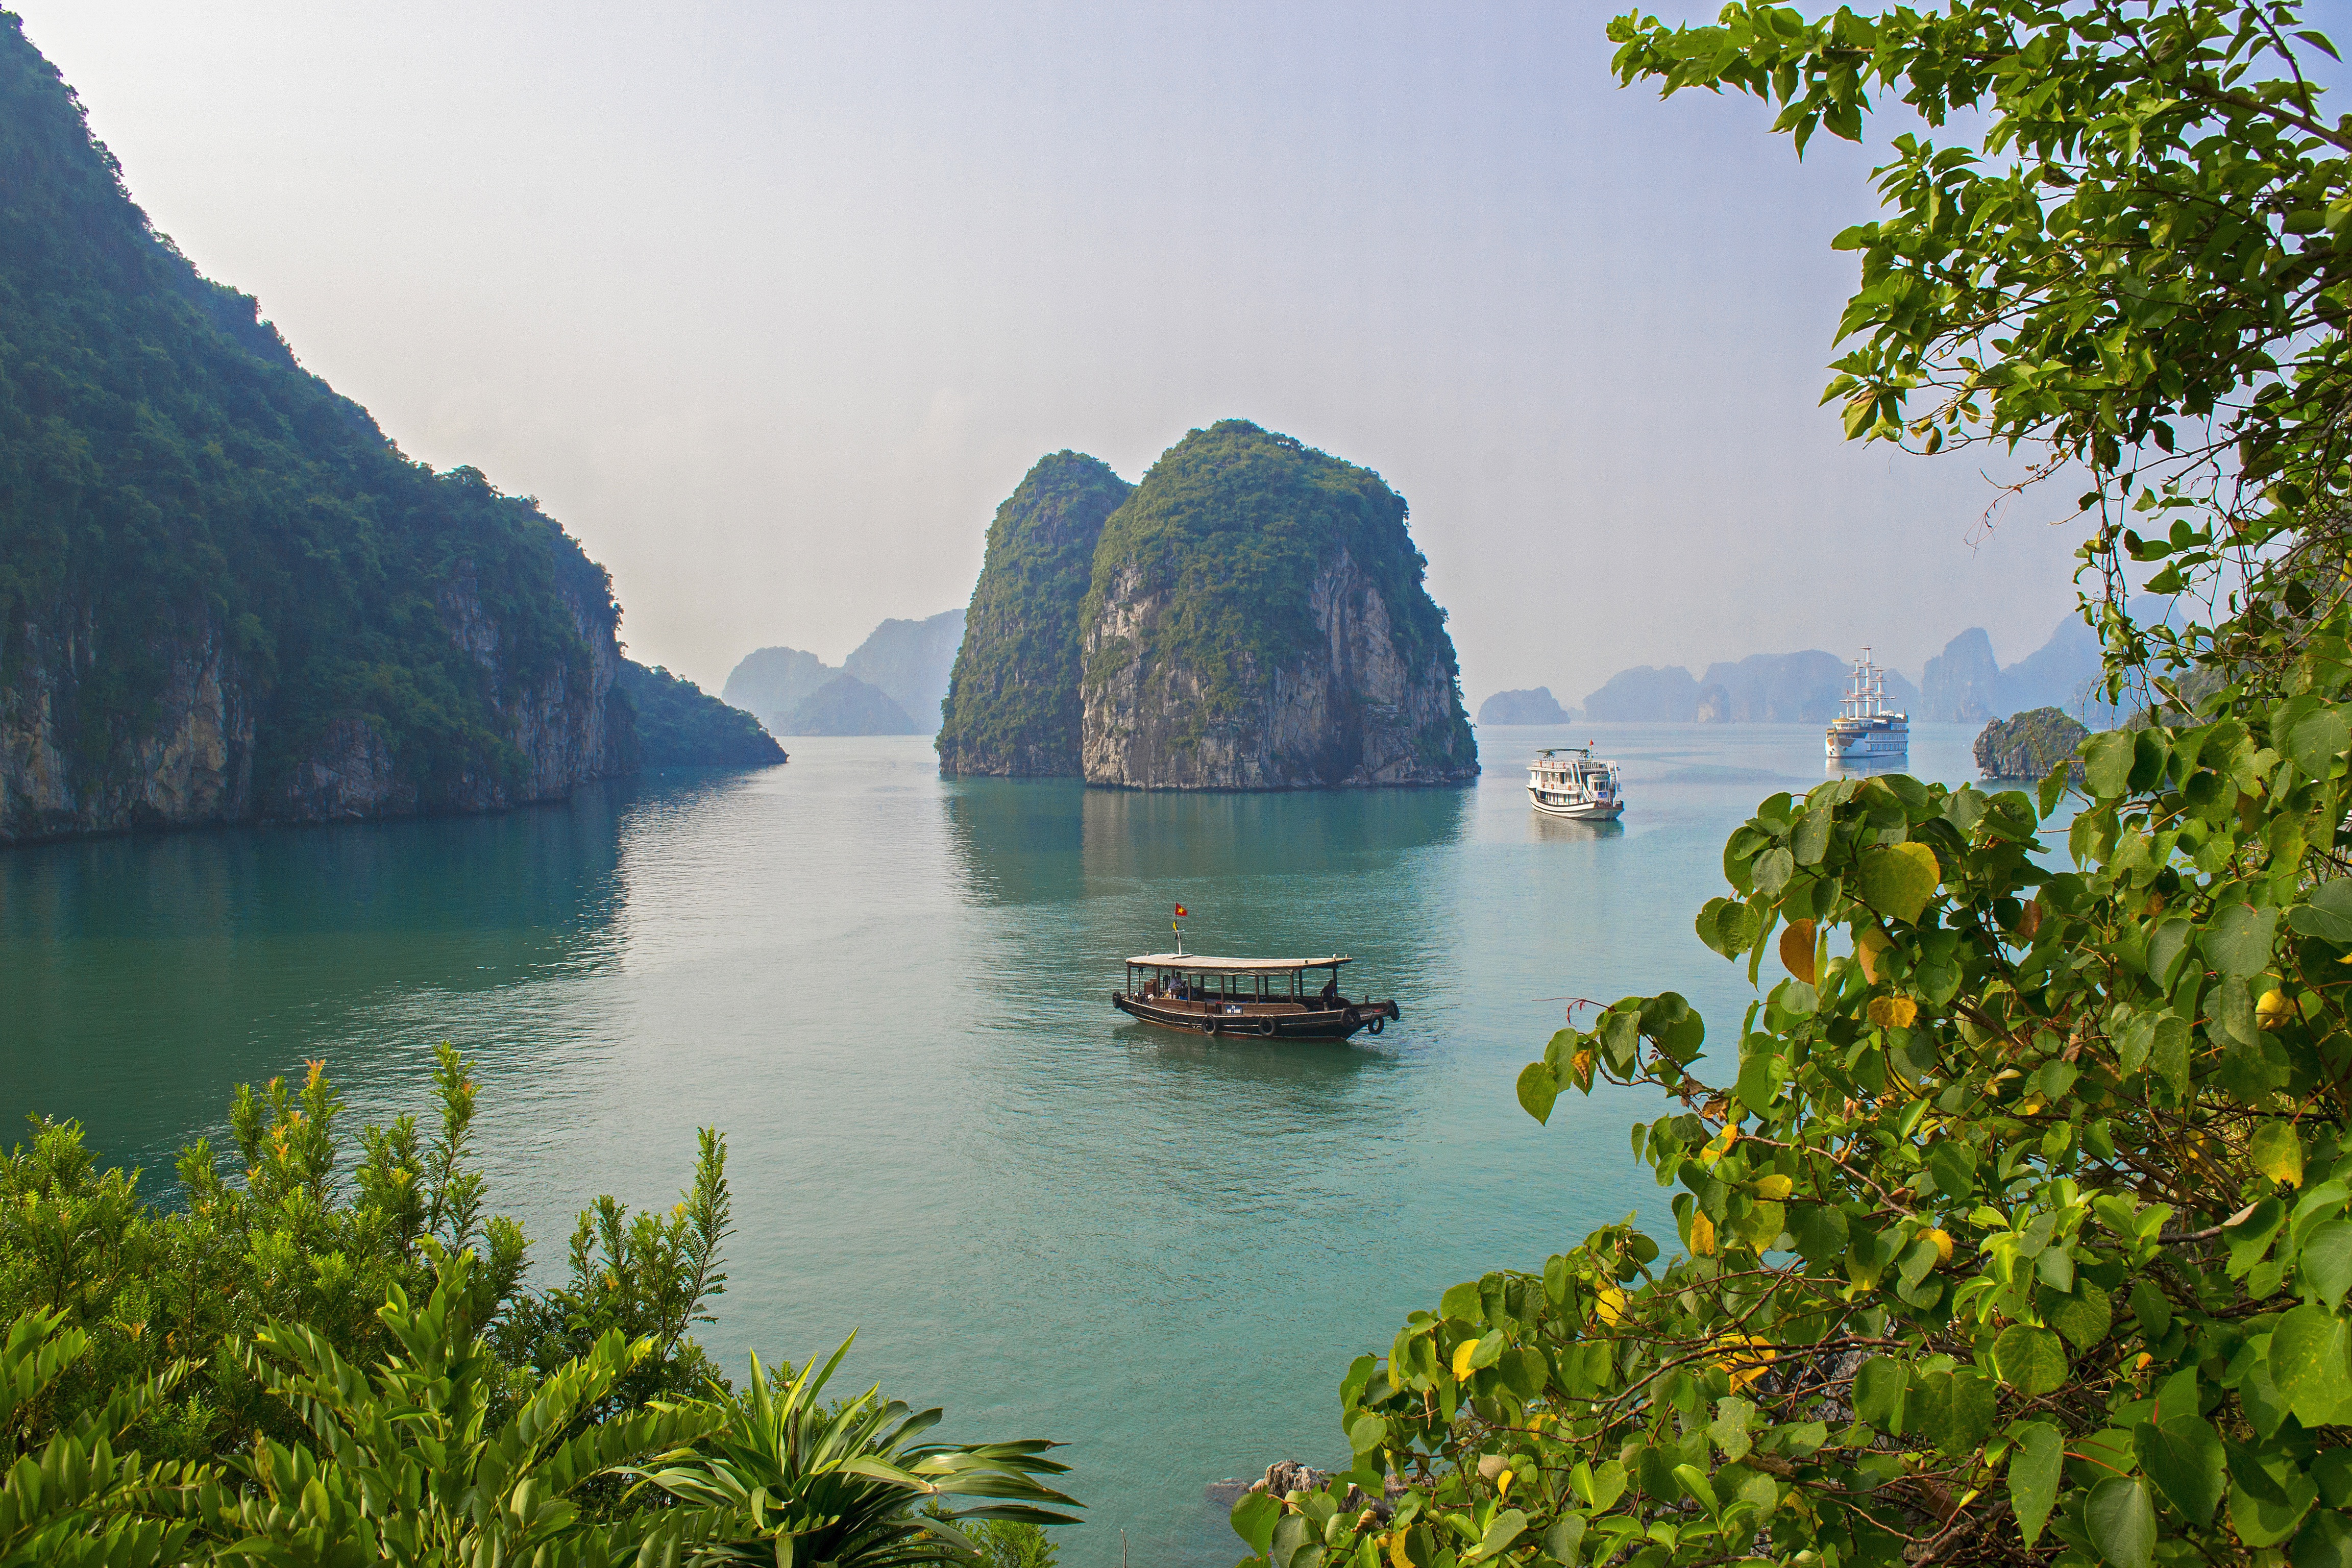 Halong full day tour with express way transfer from Hanoi